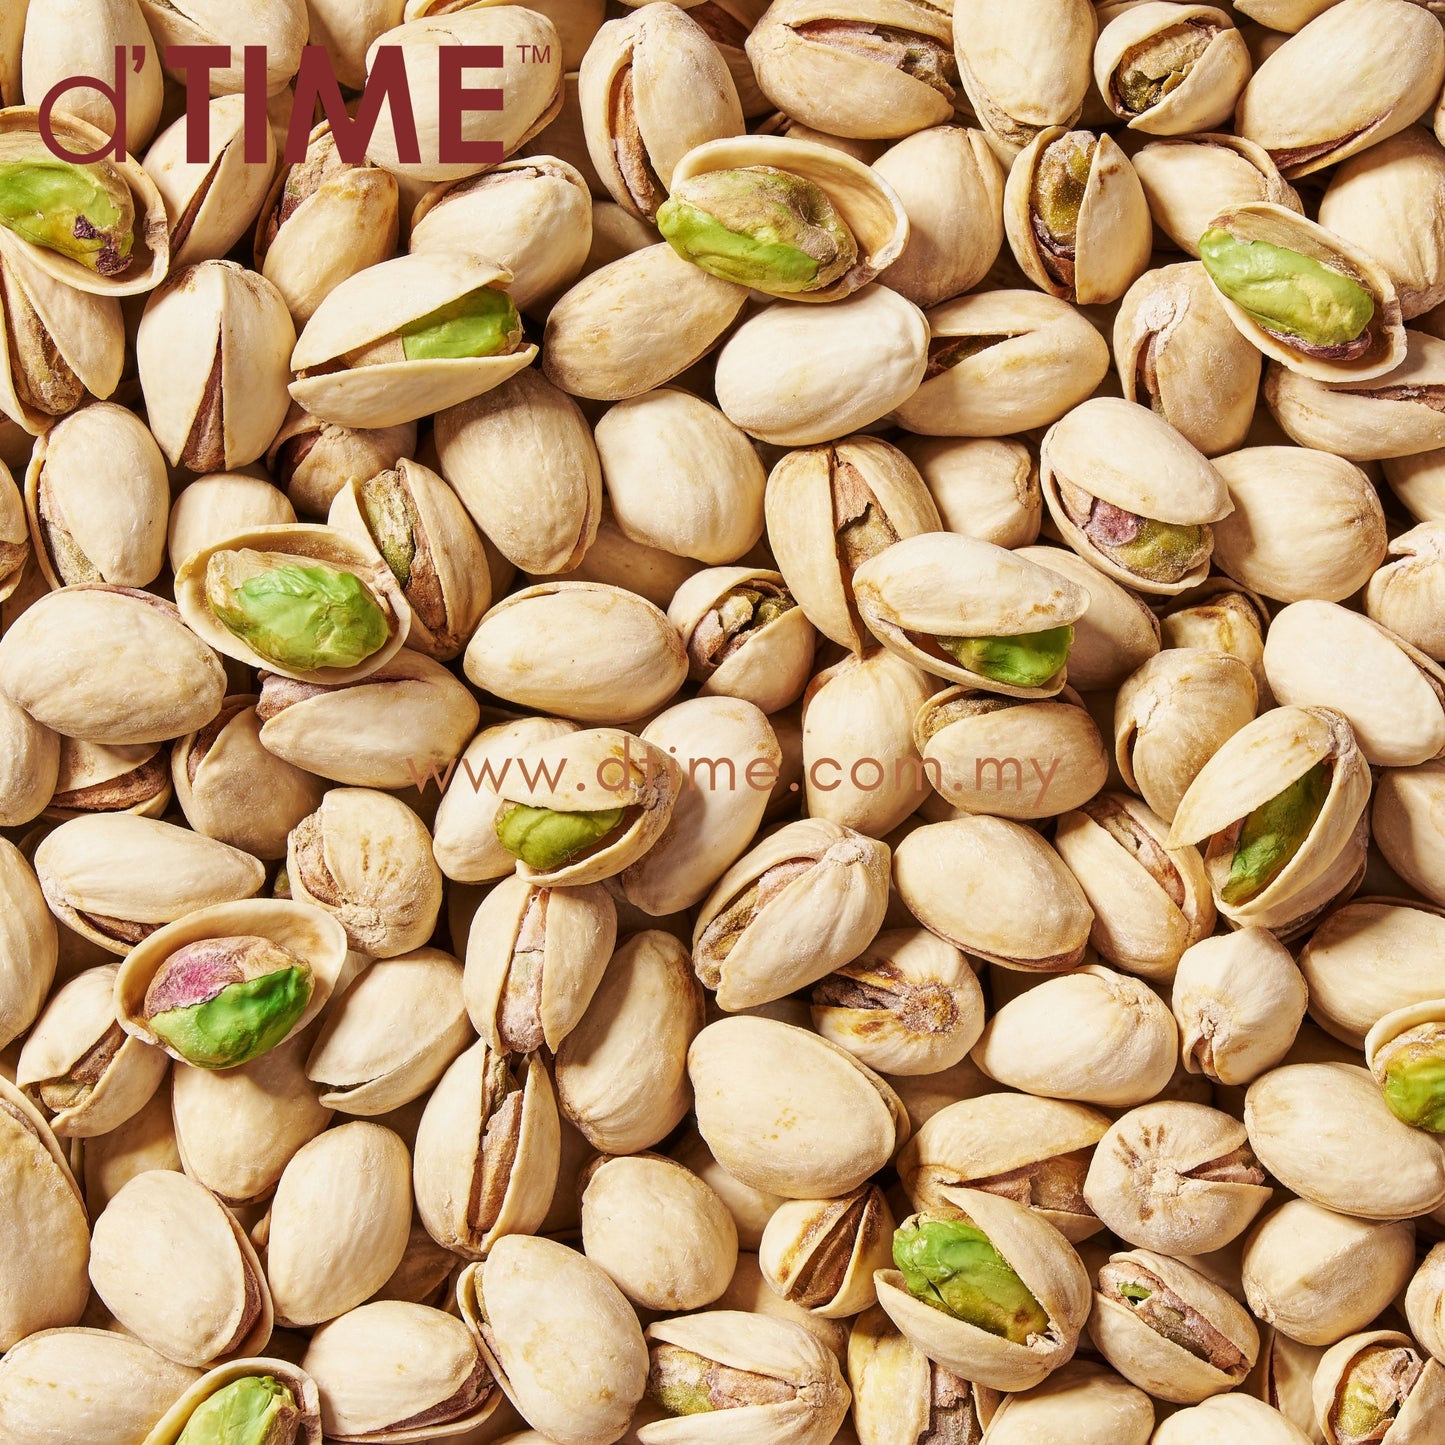 d'TIME Premium Roasted Salted Pistachio (180g)